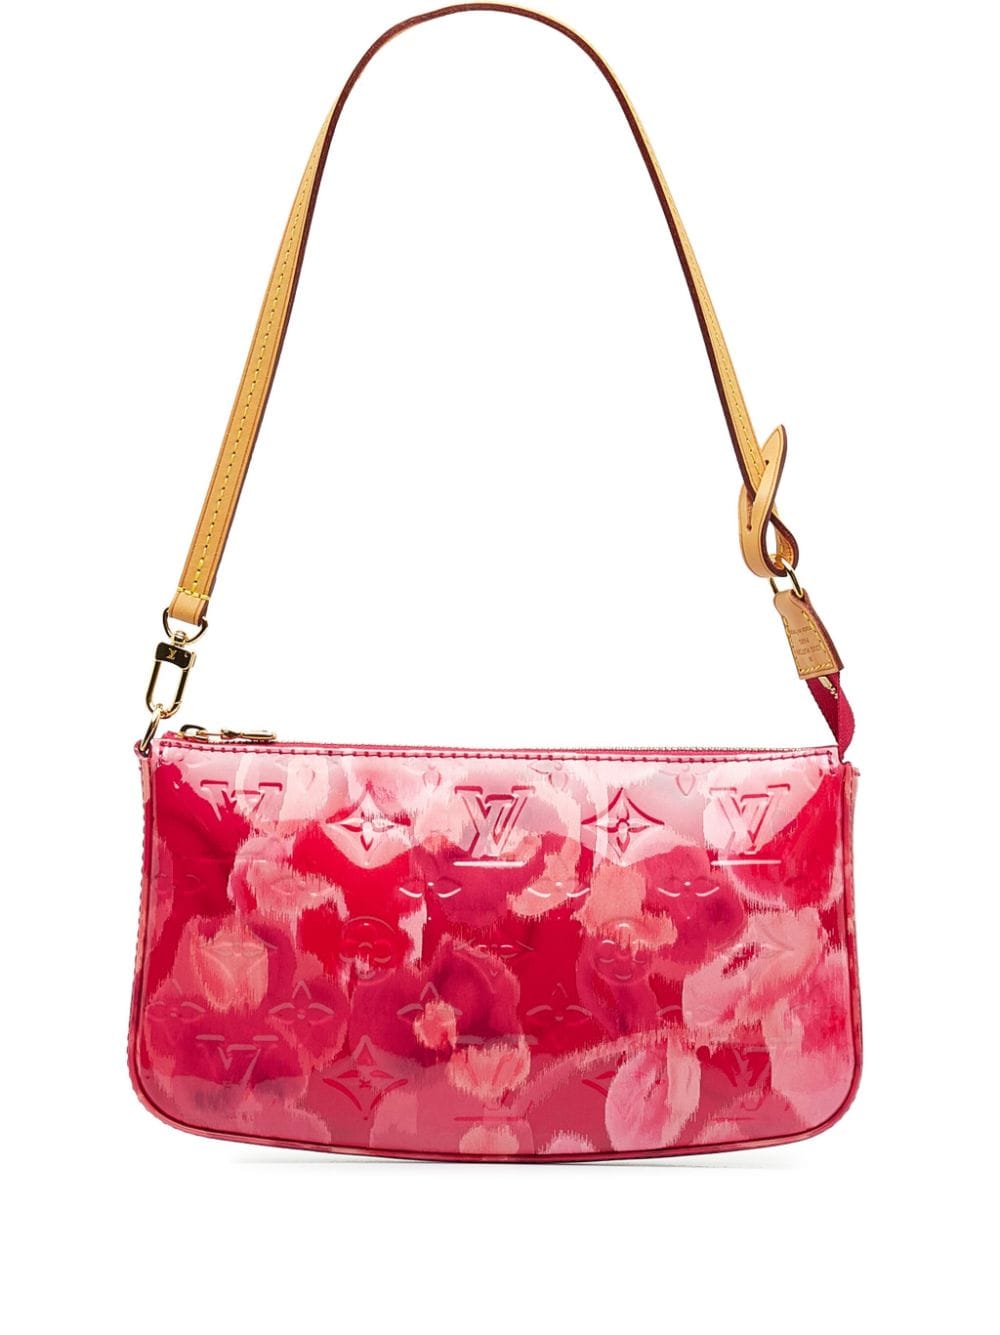 LOUIS VUITTON, a pink monogrammed vernis shoulder bag with flowers